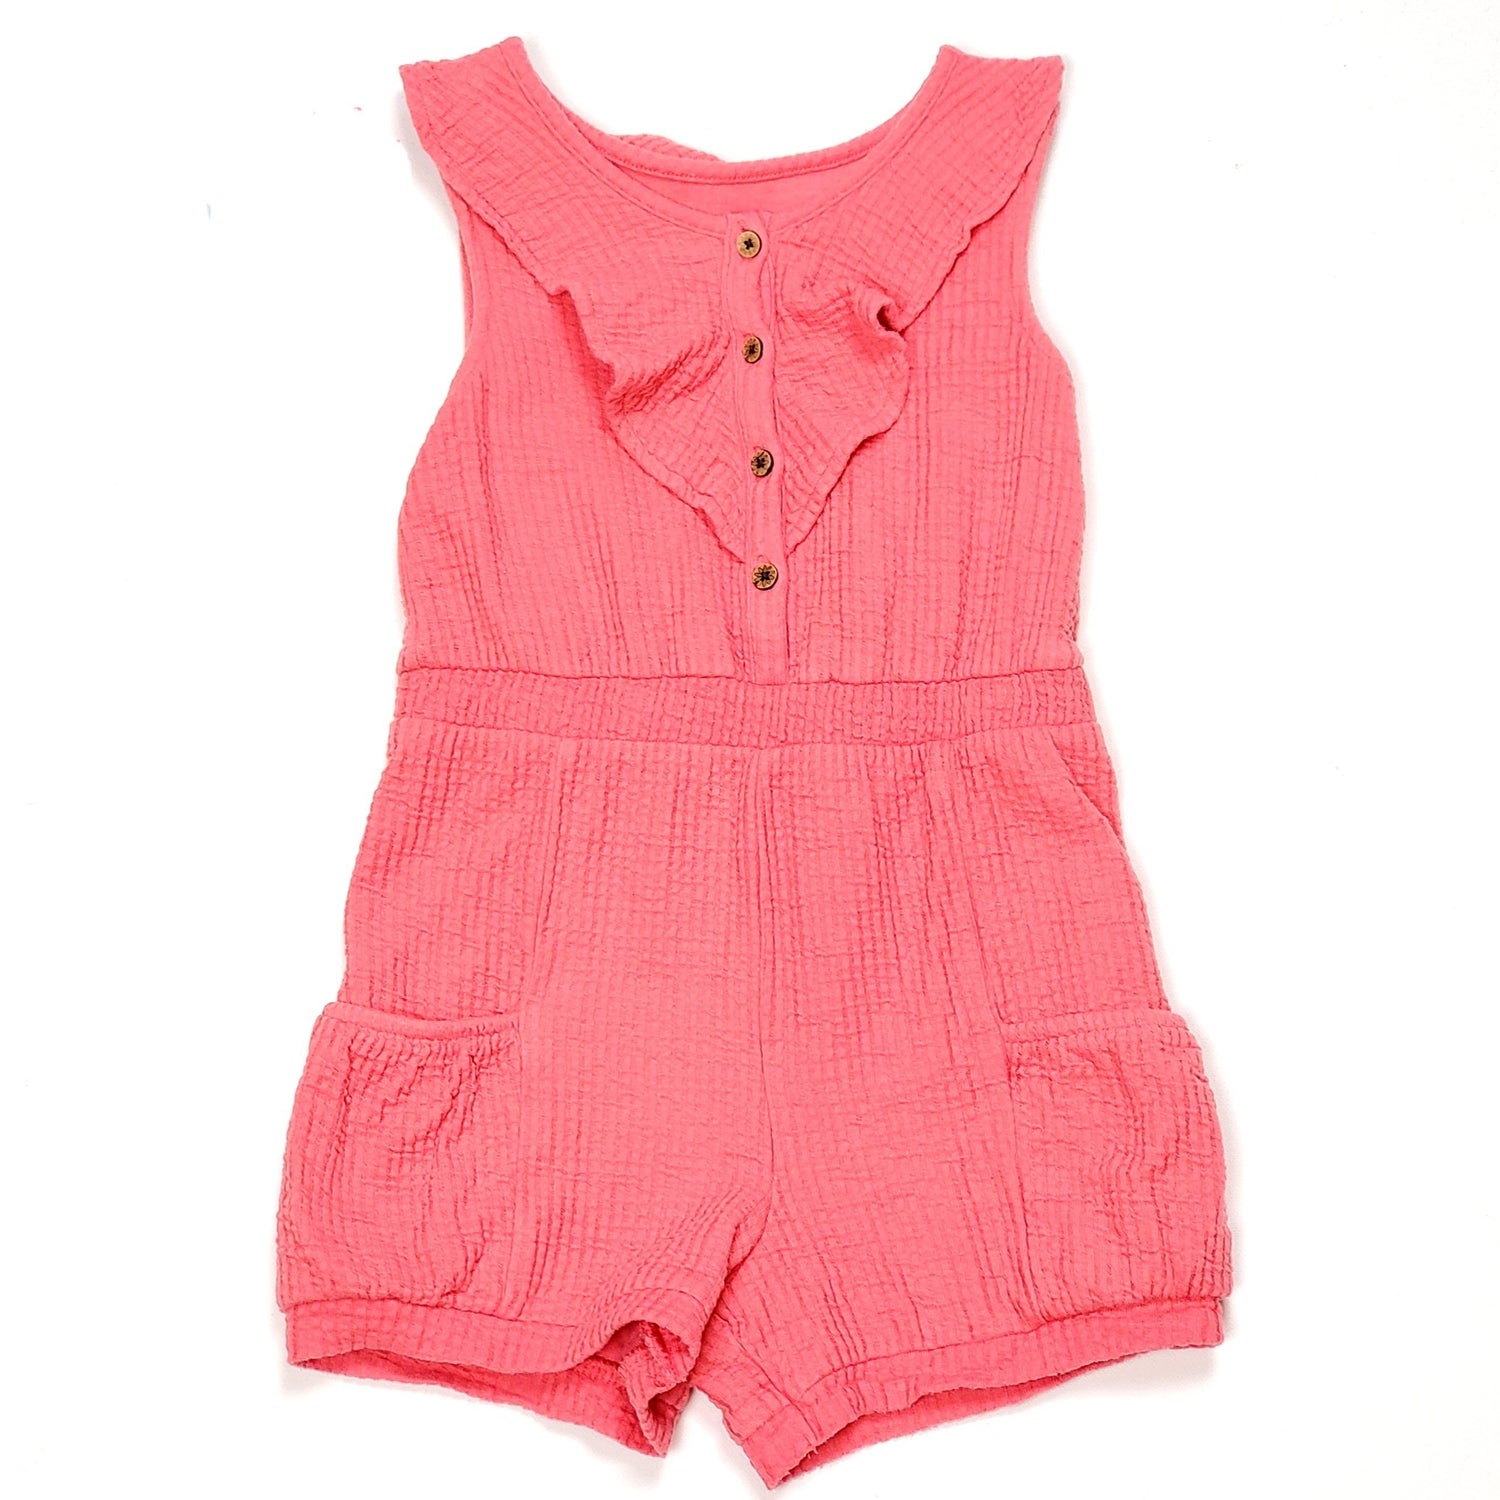 New and Used Girls One Piece and Clothing Sets For Sale Online